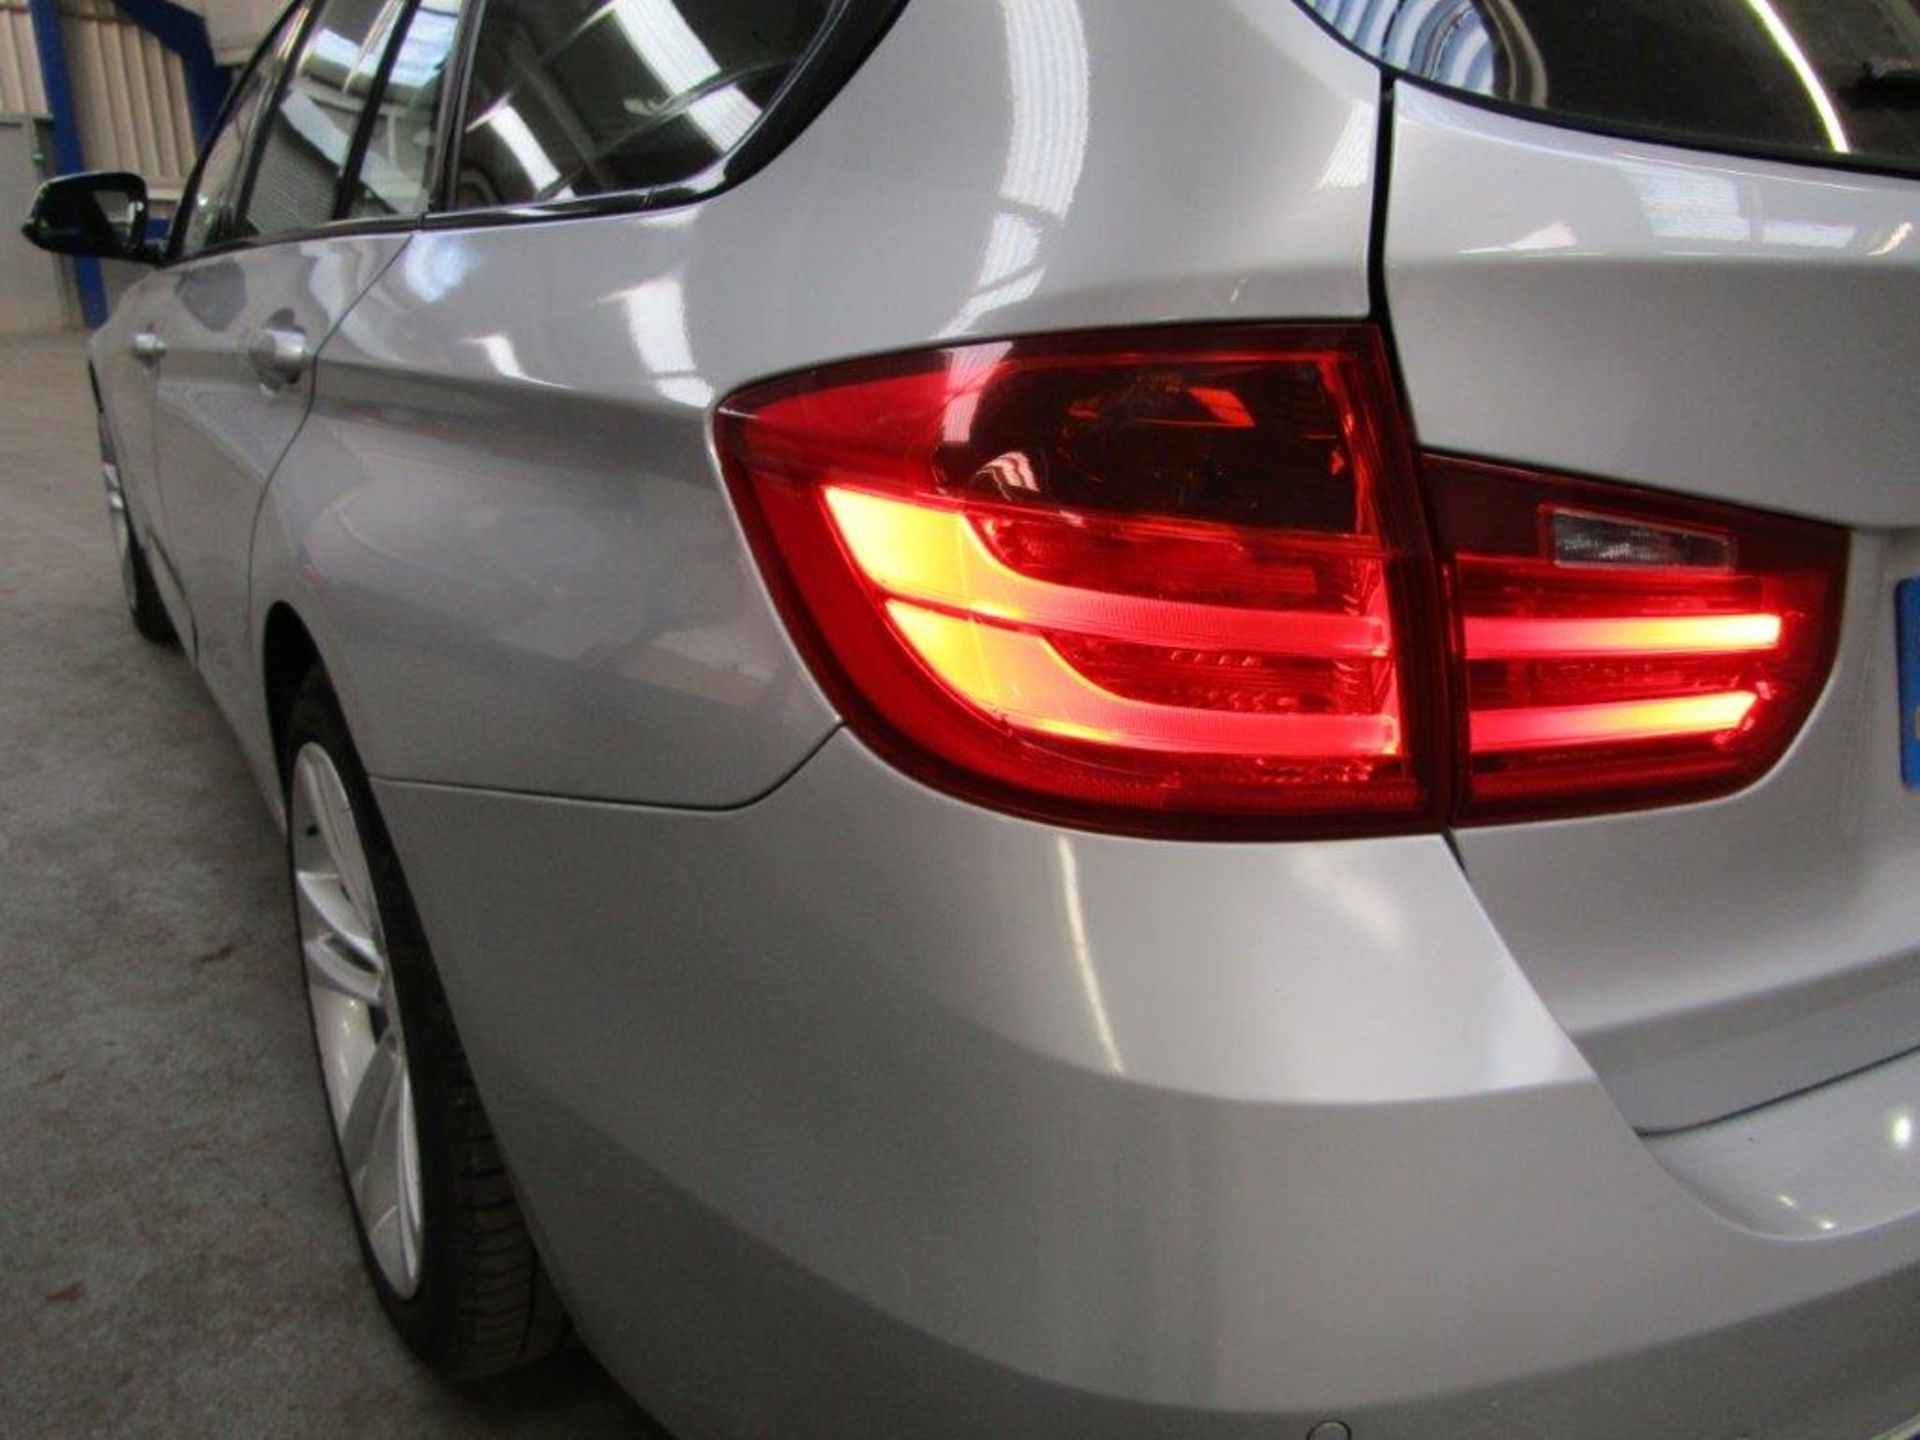 62 12 BMW 320D Sport Touring - Image 11 of 29